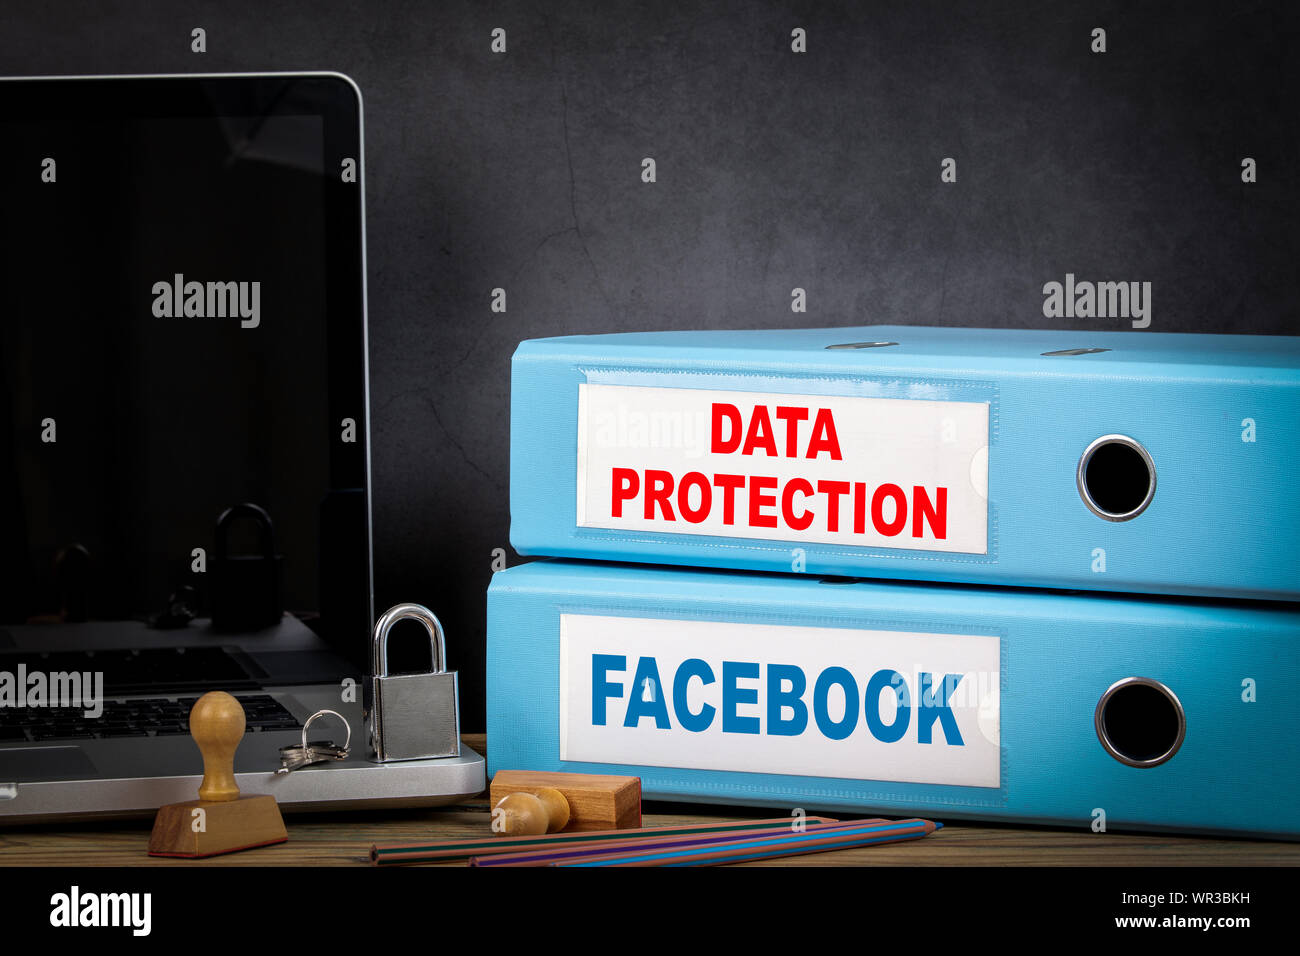 Facebook and Data Protection. Facebook is a well-known social networking service Stock Photo